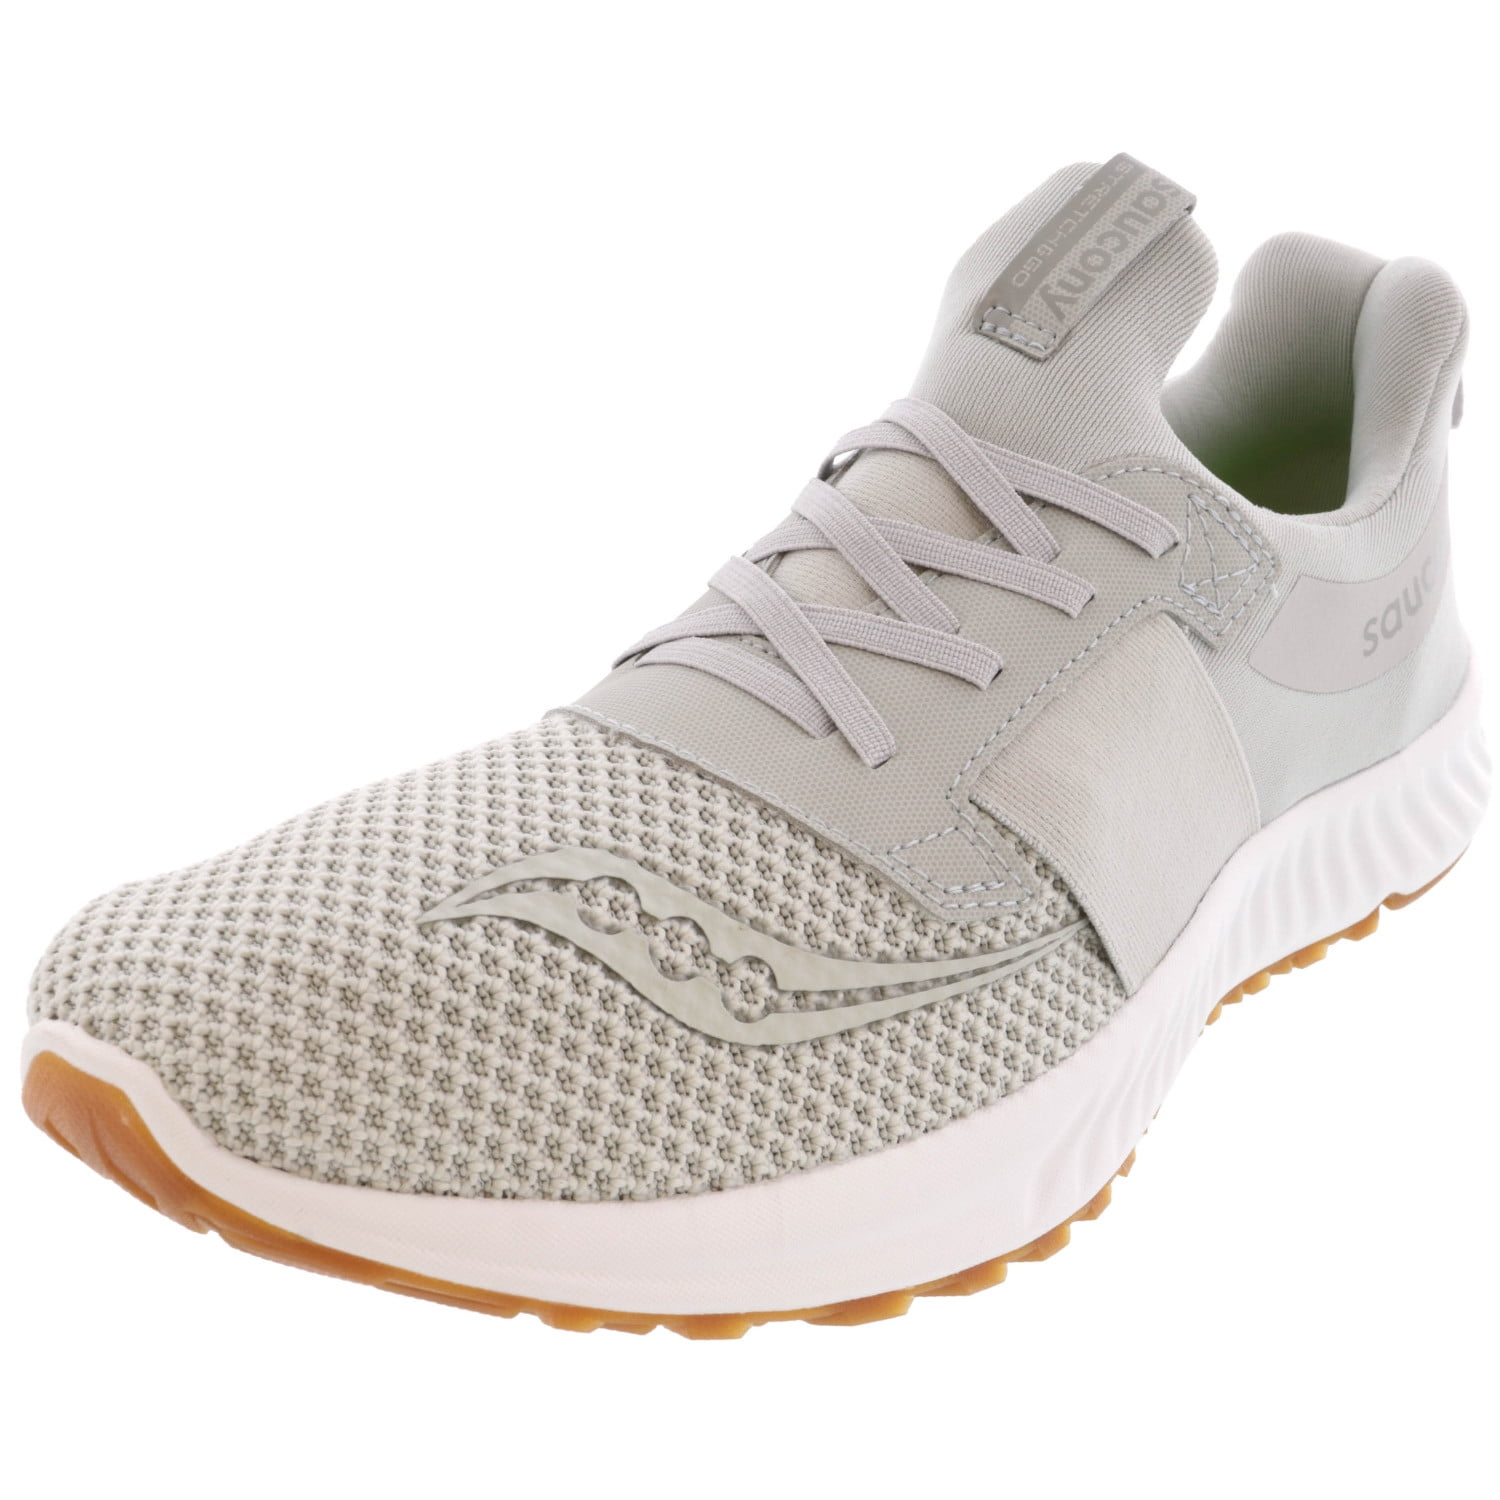 Saucony - Saucony Men's Stretch And Go Breeze Grey / Gum Ankle-High ...